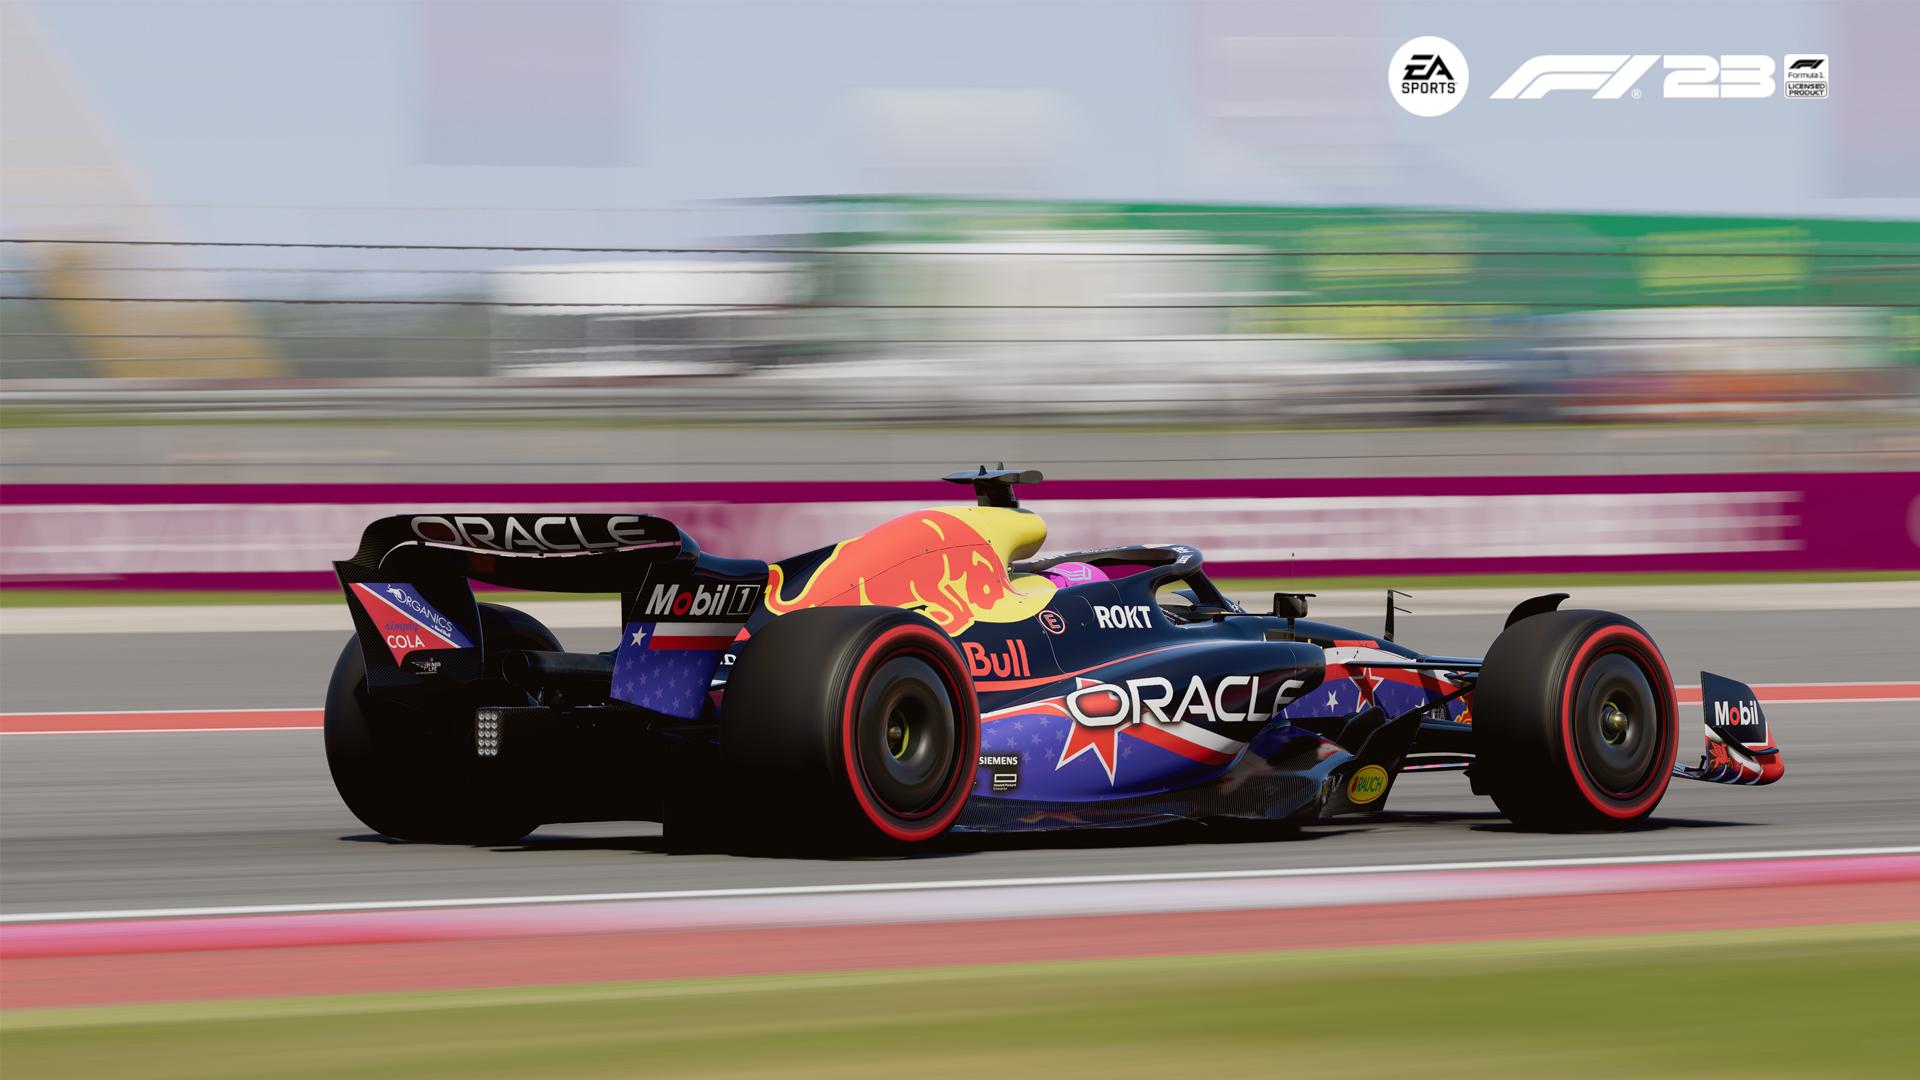 Has EA listened to fans? Our initial F1 23 gameplay verdict - The Race